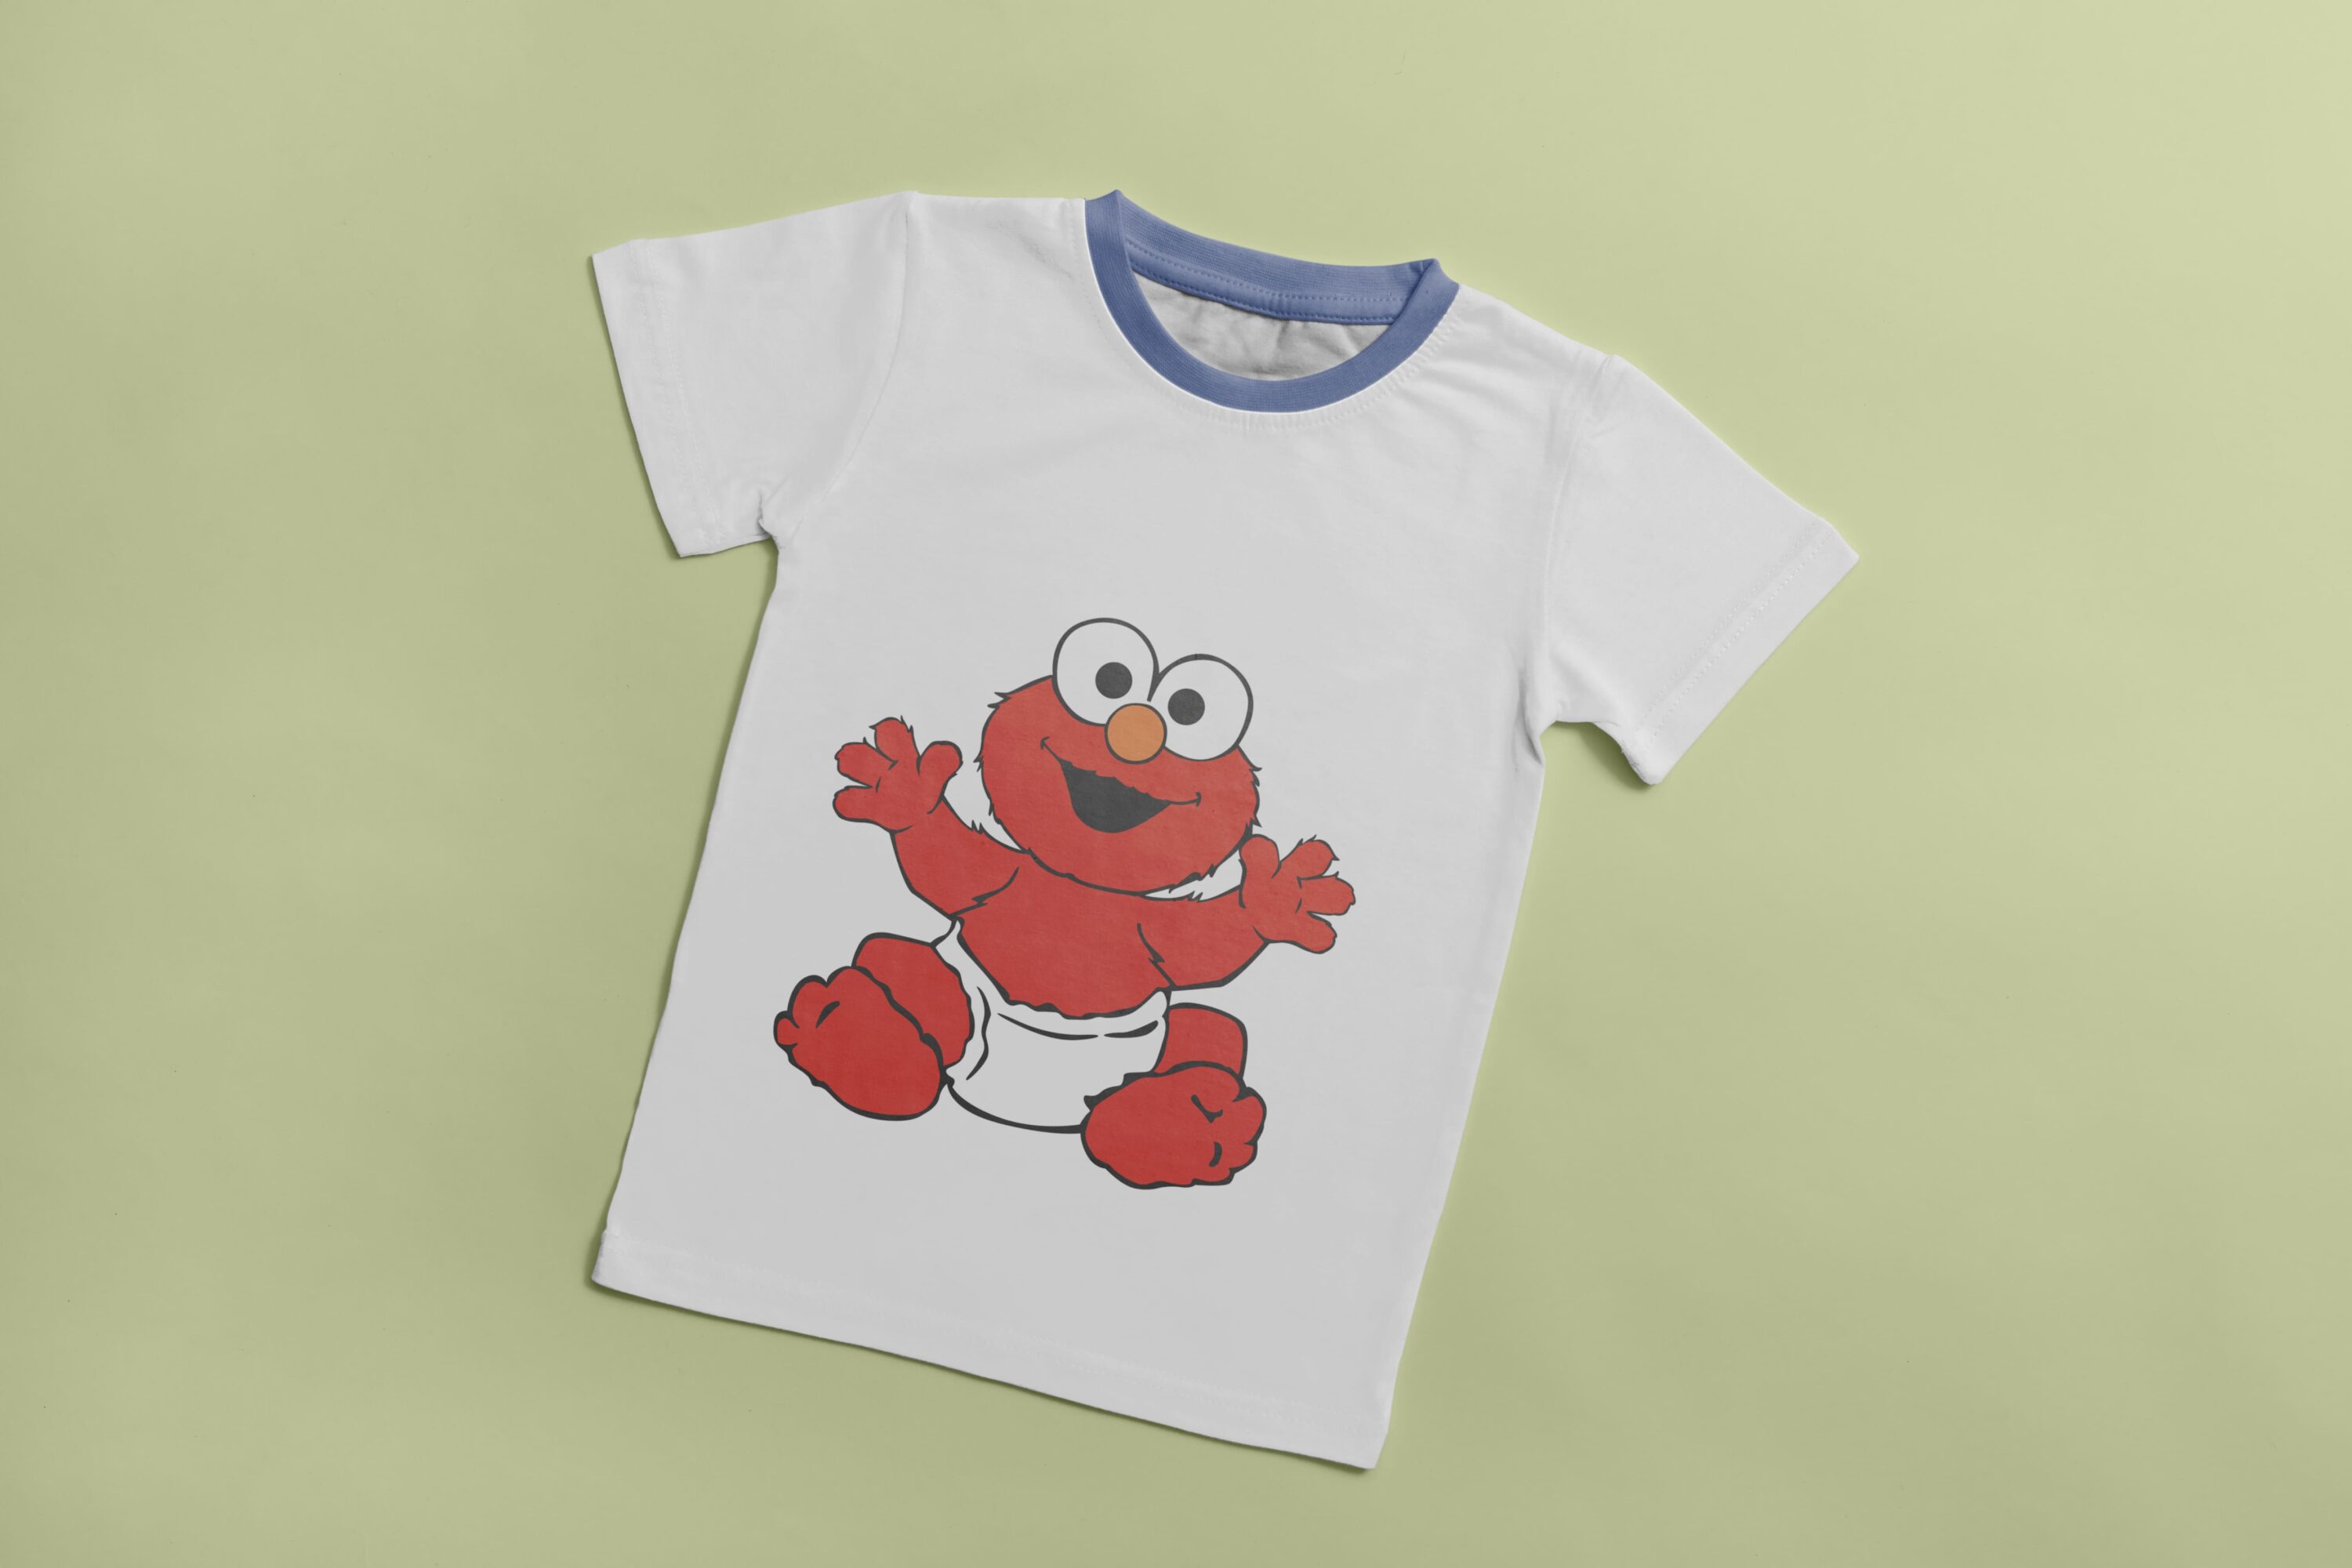 White T-shirt with a blue collar and an image of a red baby Cookie Monster.